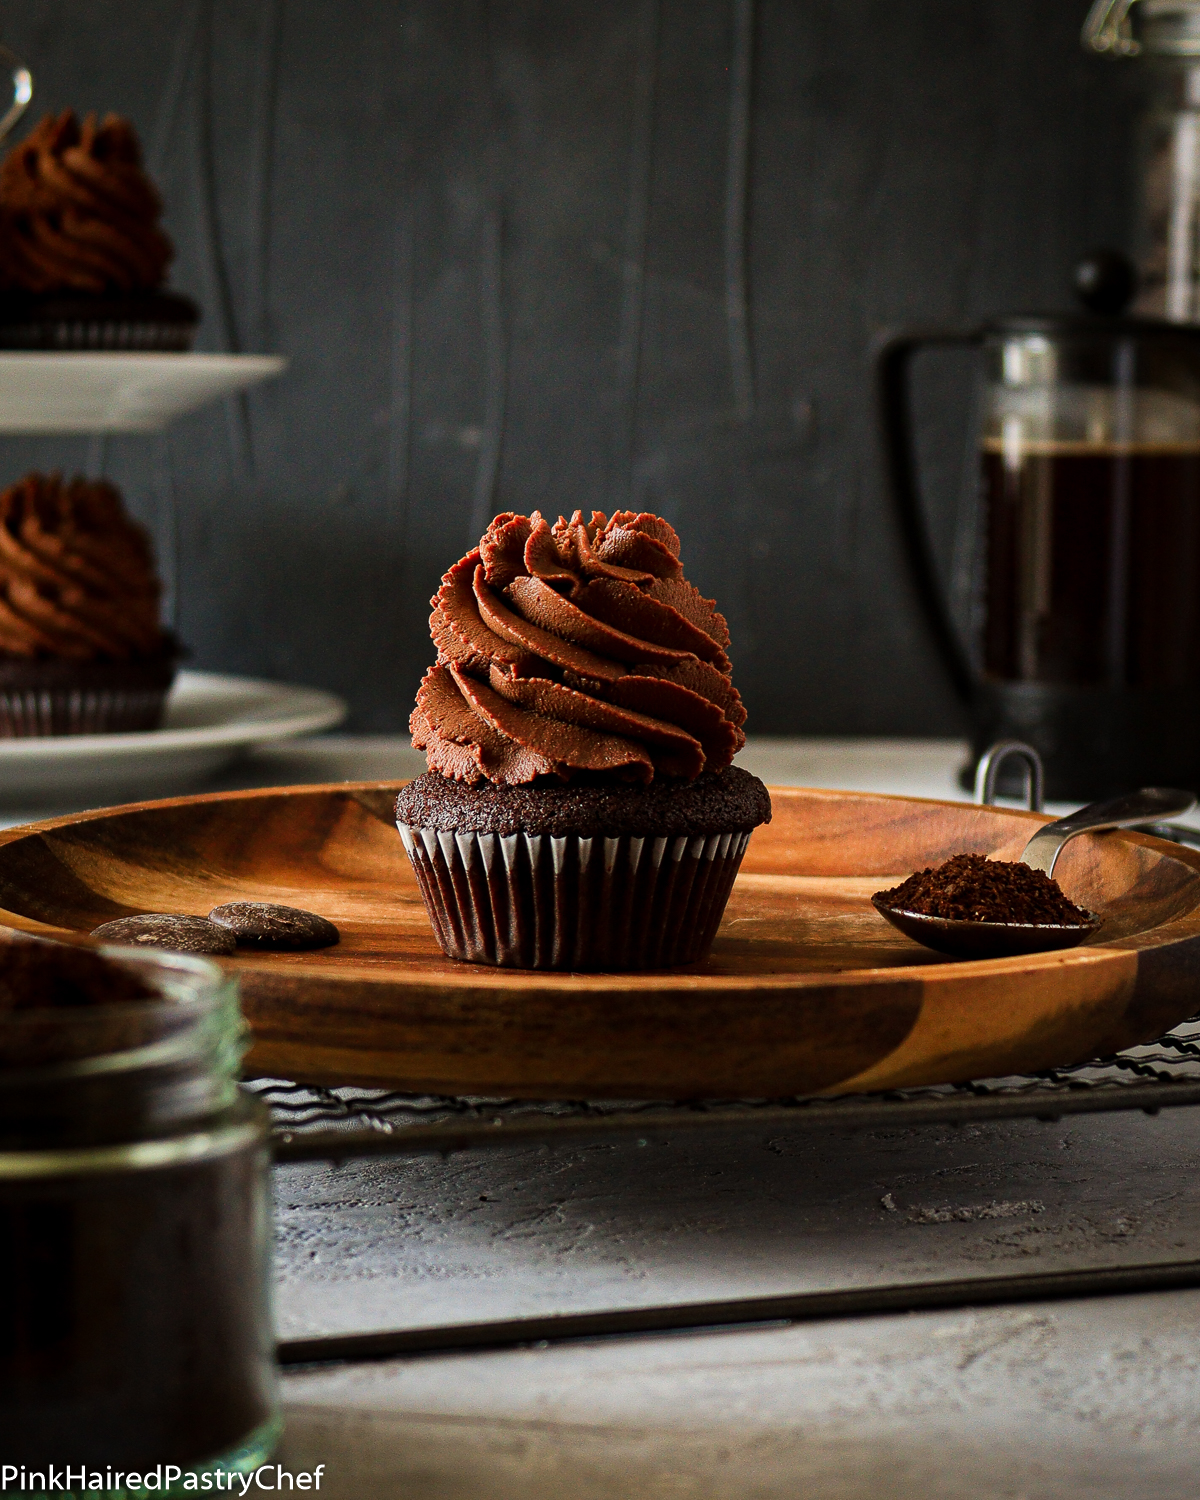 Chocolate Cupcake with Coffee Dark Chocolate Whipped Ganache piped high on top with star nozzle, Cupcake is on a wooden plate on top of a black wire rack, More cupcakes on cupcake stand in background along with french press full of coffee. Small jar of ground coffee to the side for decoration